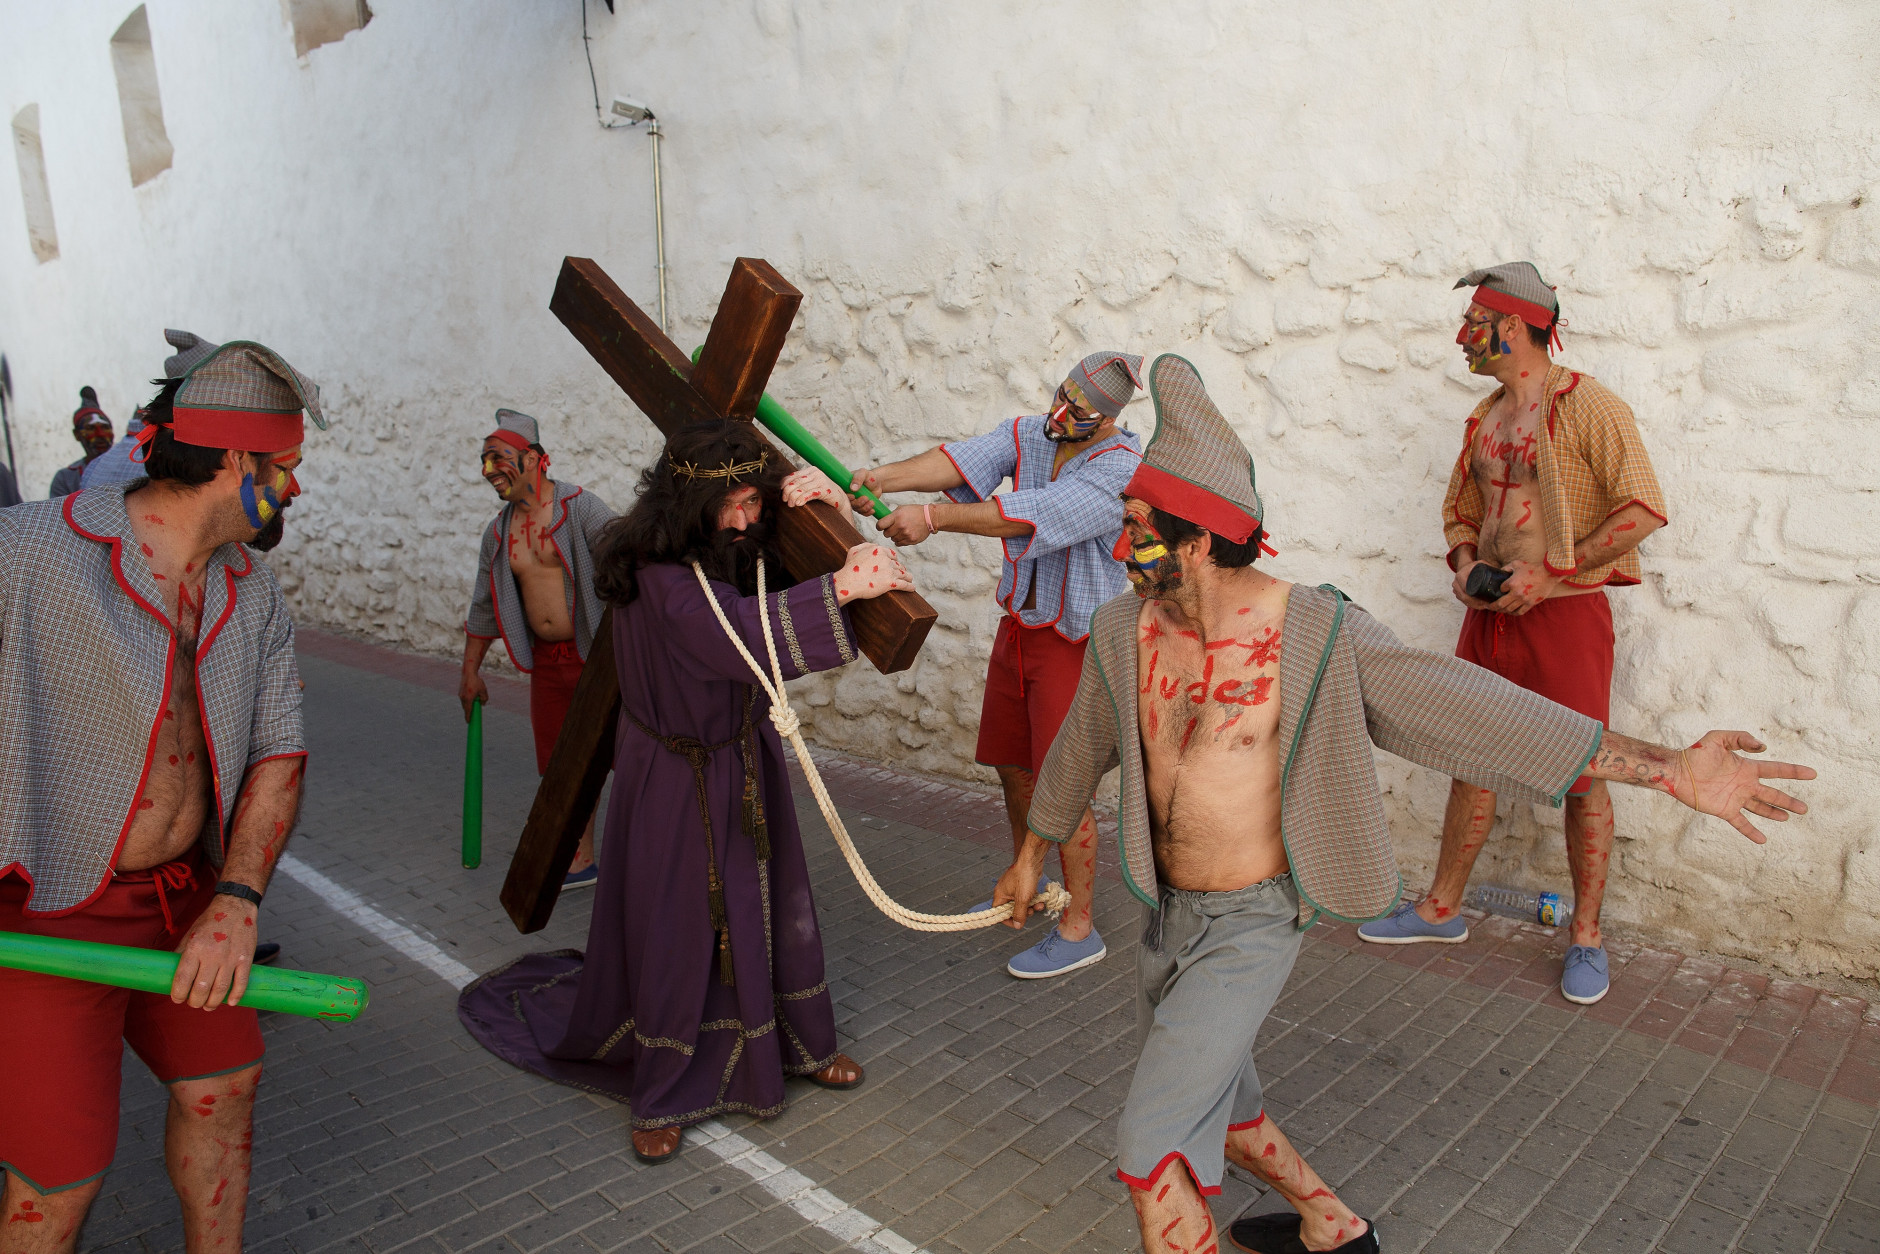 CUEVAS DEL ALMANZORA, SPAIN - MARCH 25:  Actors representing the 'Judios' and Jesus Christ take part in 'La Judea' along the streets during a Holy Friday procession on March 25, 2016 in Cuevas del Almanzora, in Almeria province, Spain. 'La Judea' belongs to 'Hermandad de Nuestro Padre Jesus Nazareno'. Certain families of Cuevas del Almanzora have kept this tradition alive for more than a hundred years. Men wearing costume hold a wood maze representing 'los Judios' (the Jewish) pretend to beat and pull  'El Senor' who represents Jesus Christ around the village as he holds a cross on his back. Spain celebrates holy week before Easter with processions in most Spanish towns and villages.  (Photo by Pablo Blazquez Dominguez/Getty Images)